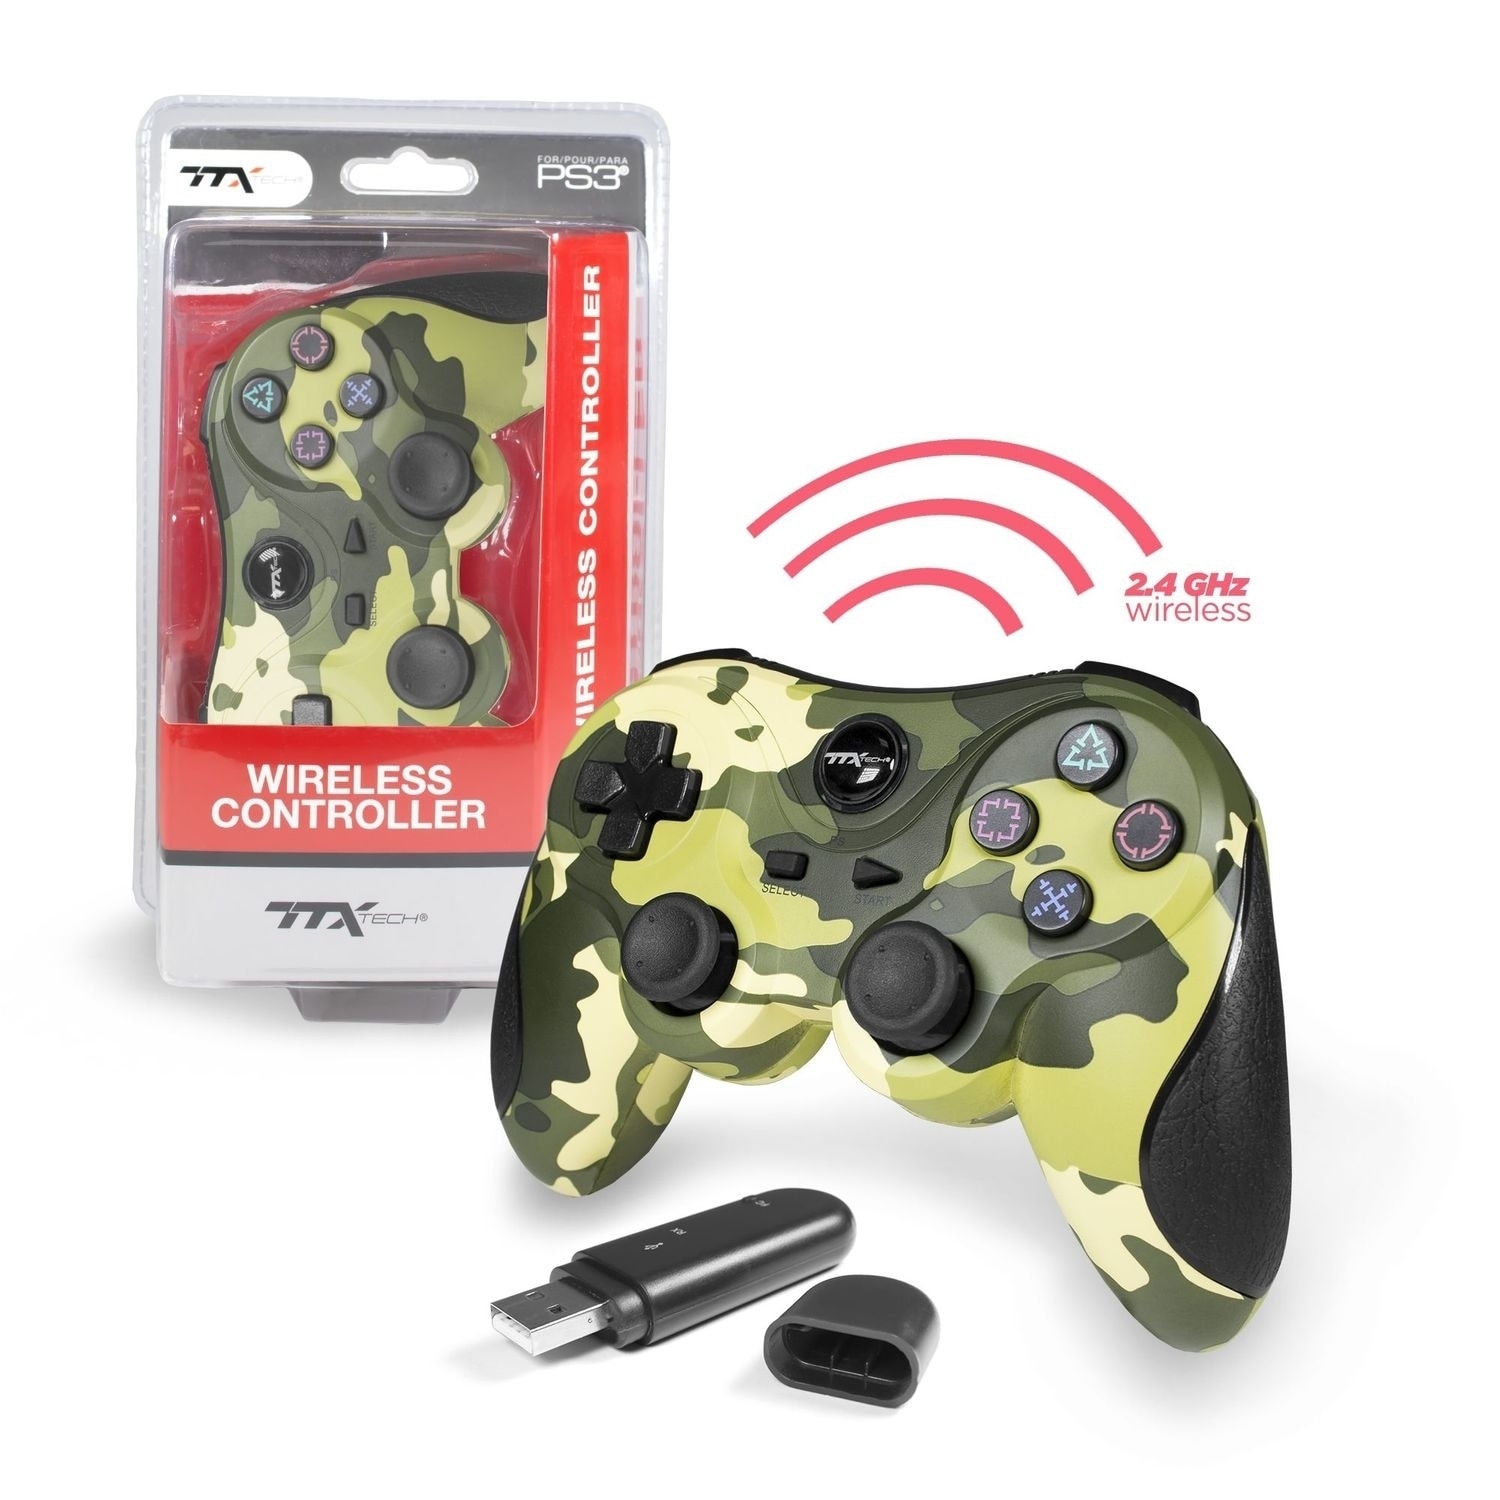 wireless controller for ps3